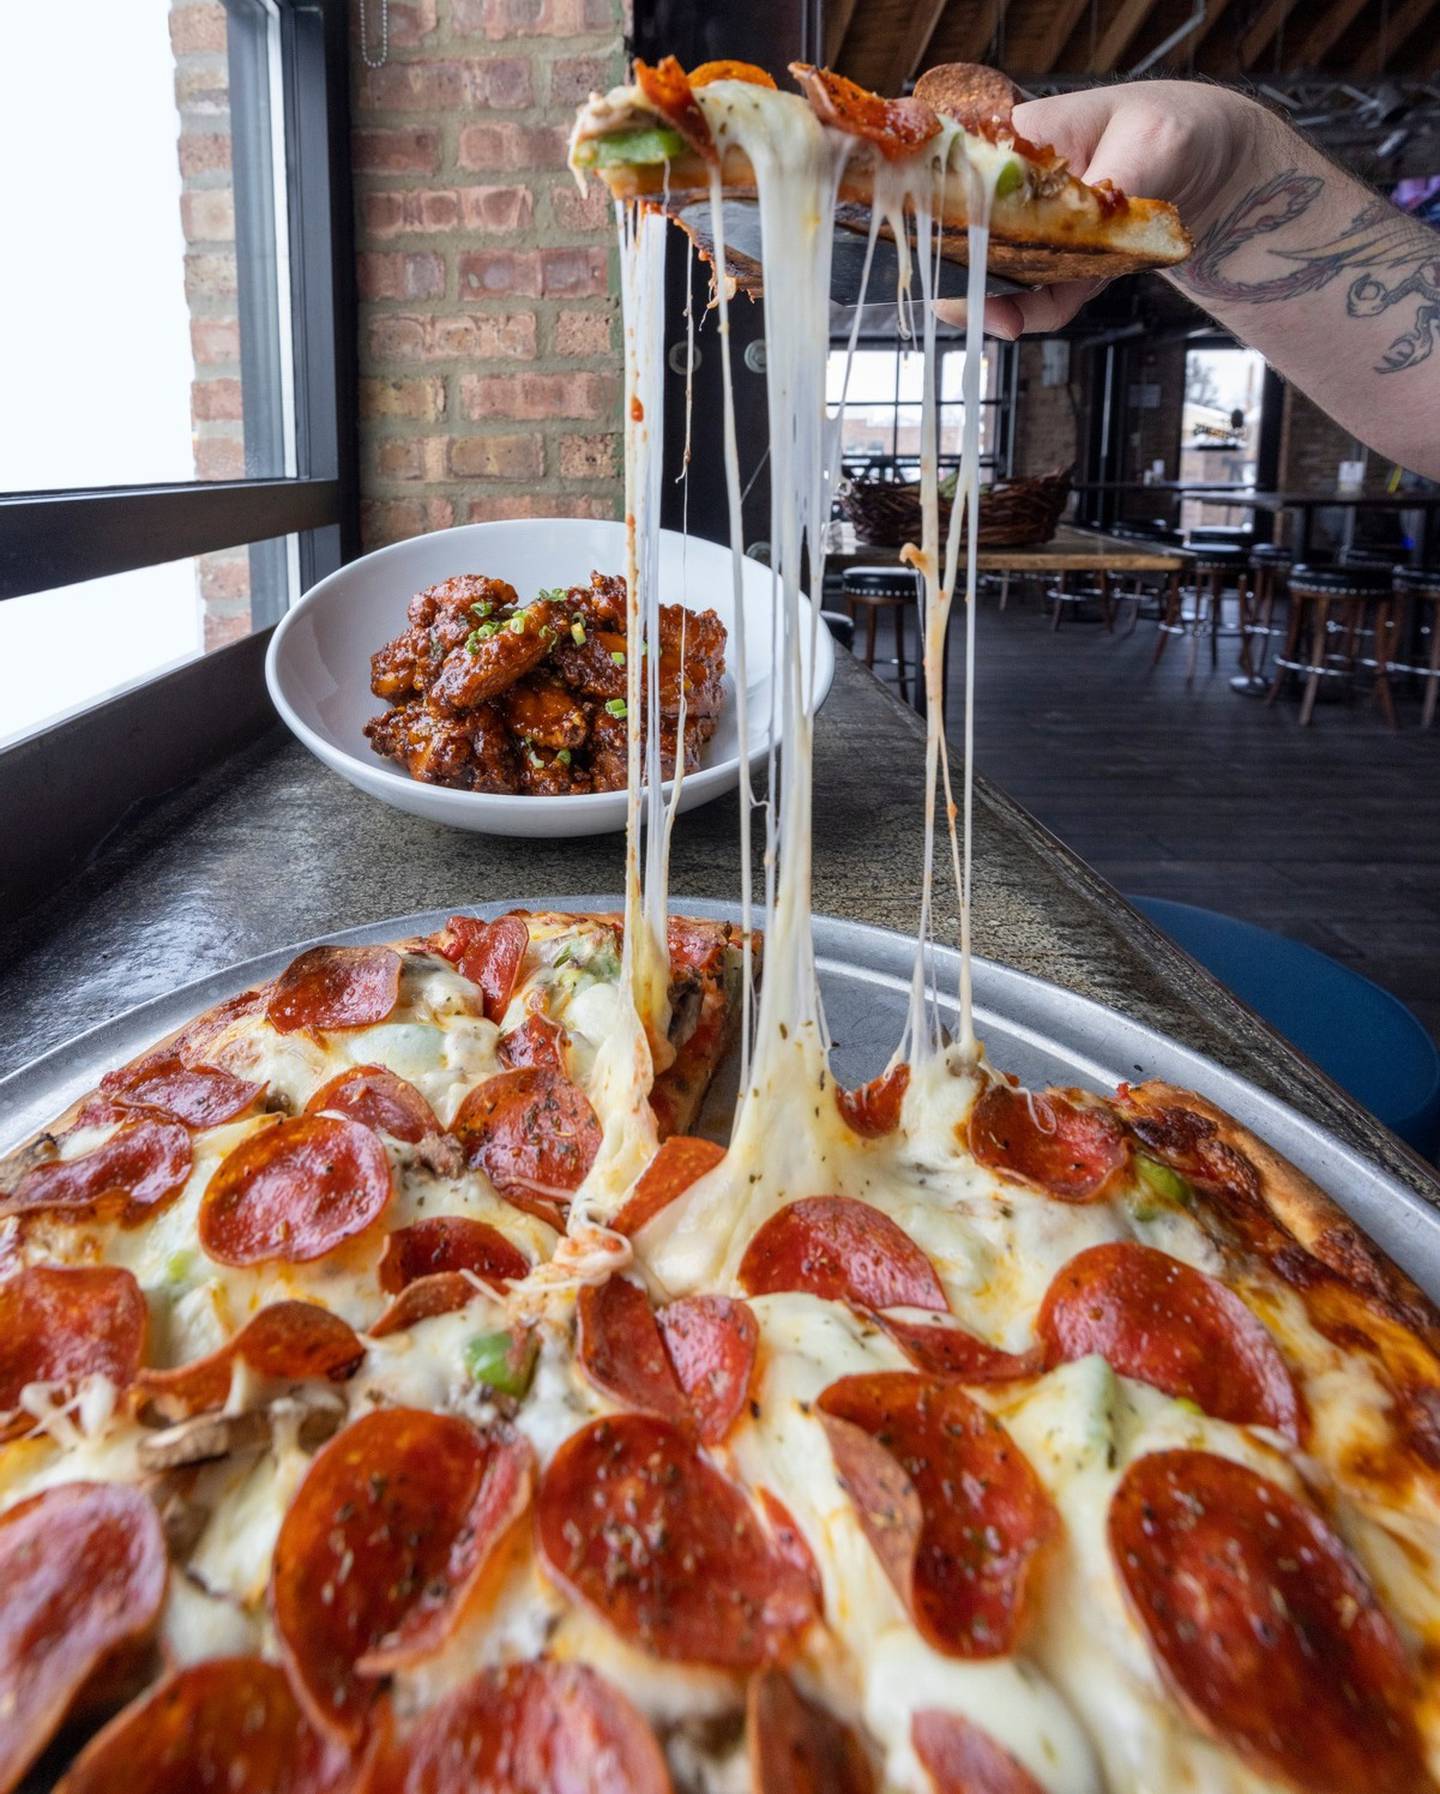 Paisans Pizzeria & Bar in Berwyn was named one of the finest pizza places in the Cook County as as picked by our readers in 2021. (Photo from Paisans Pizzeria & Bar Facebook page)